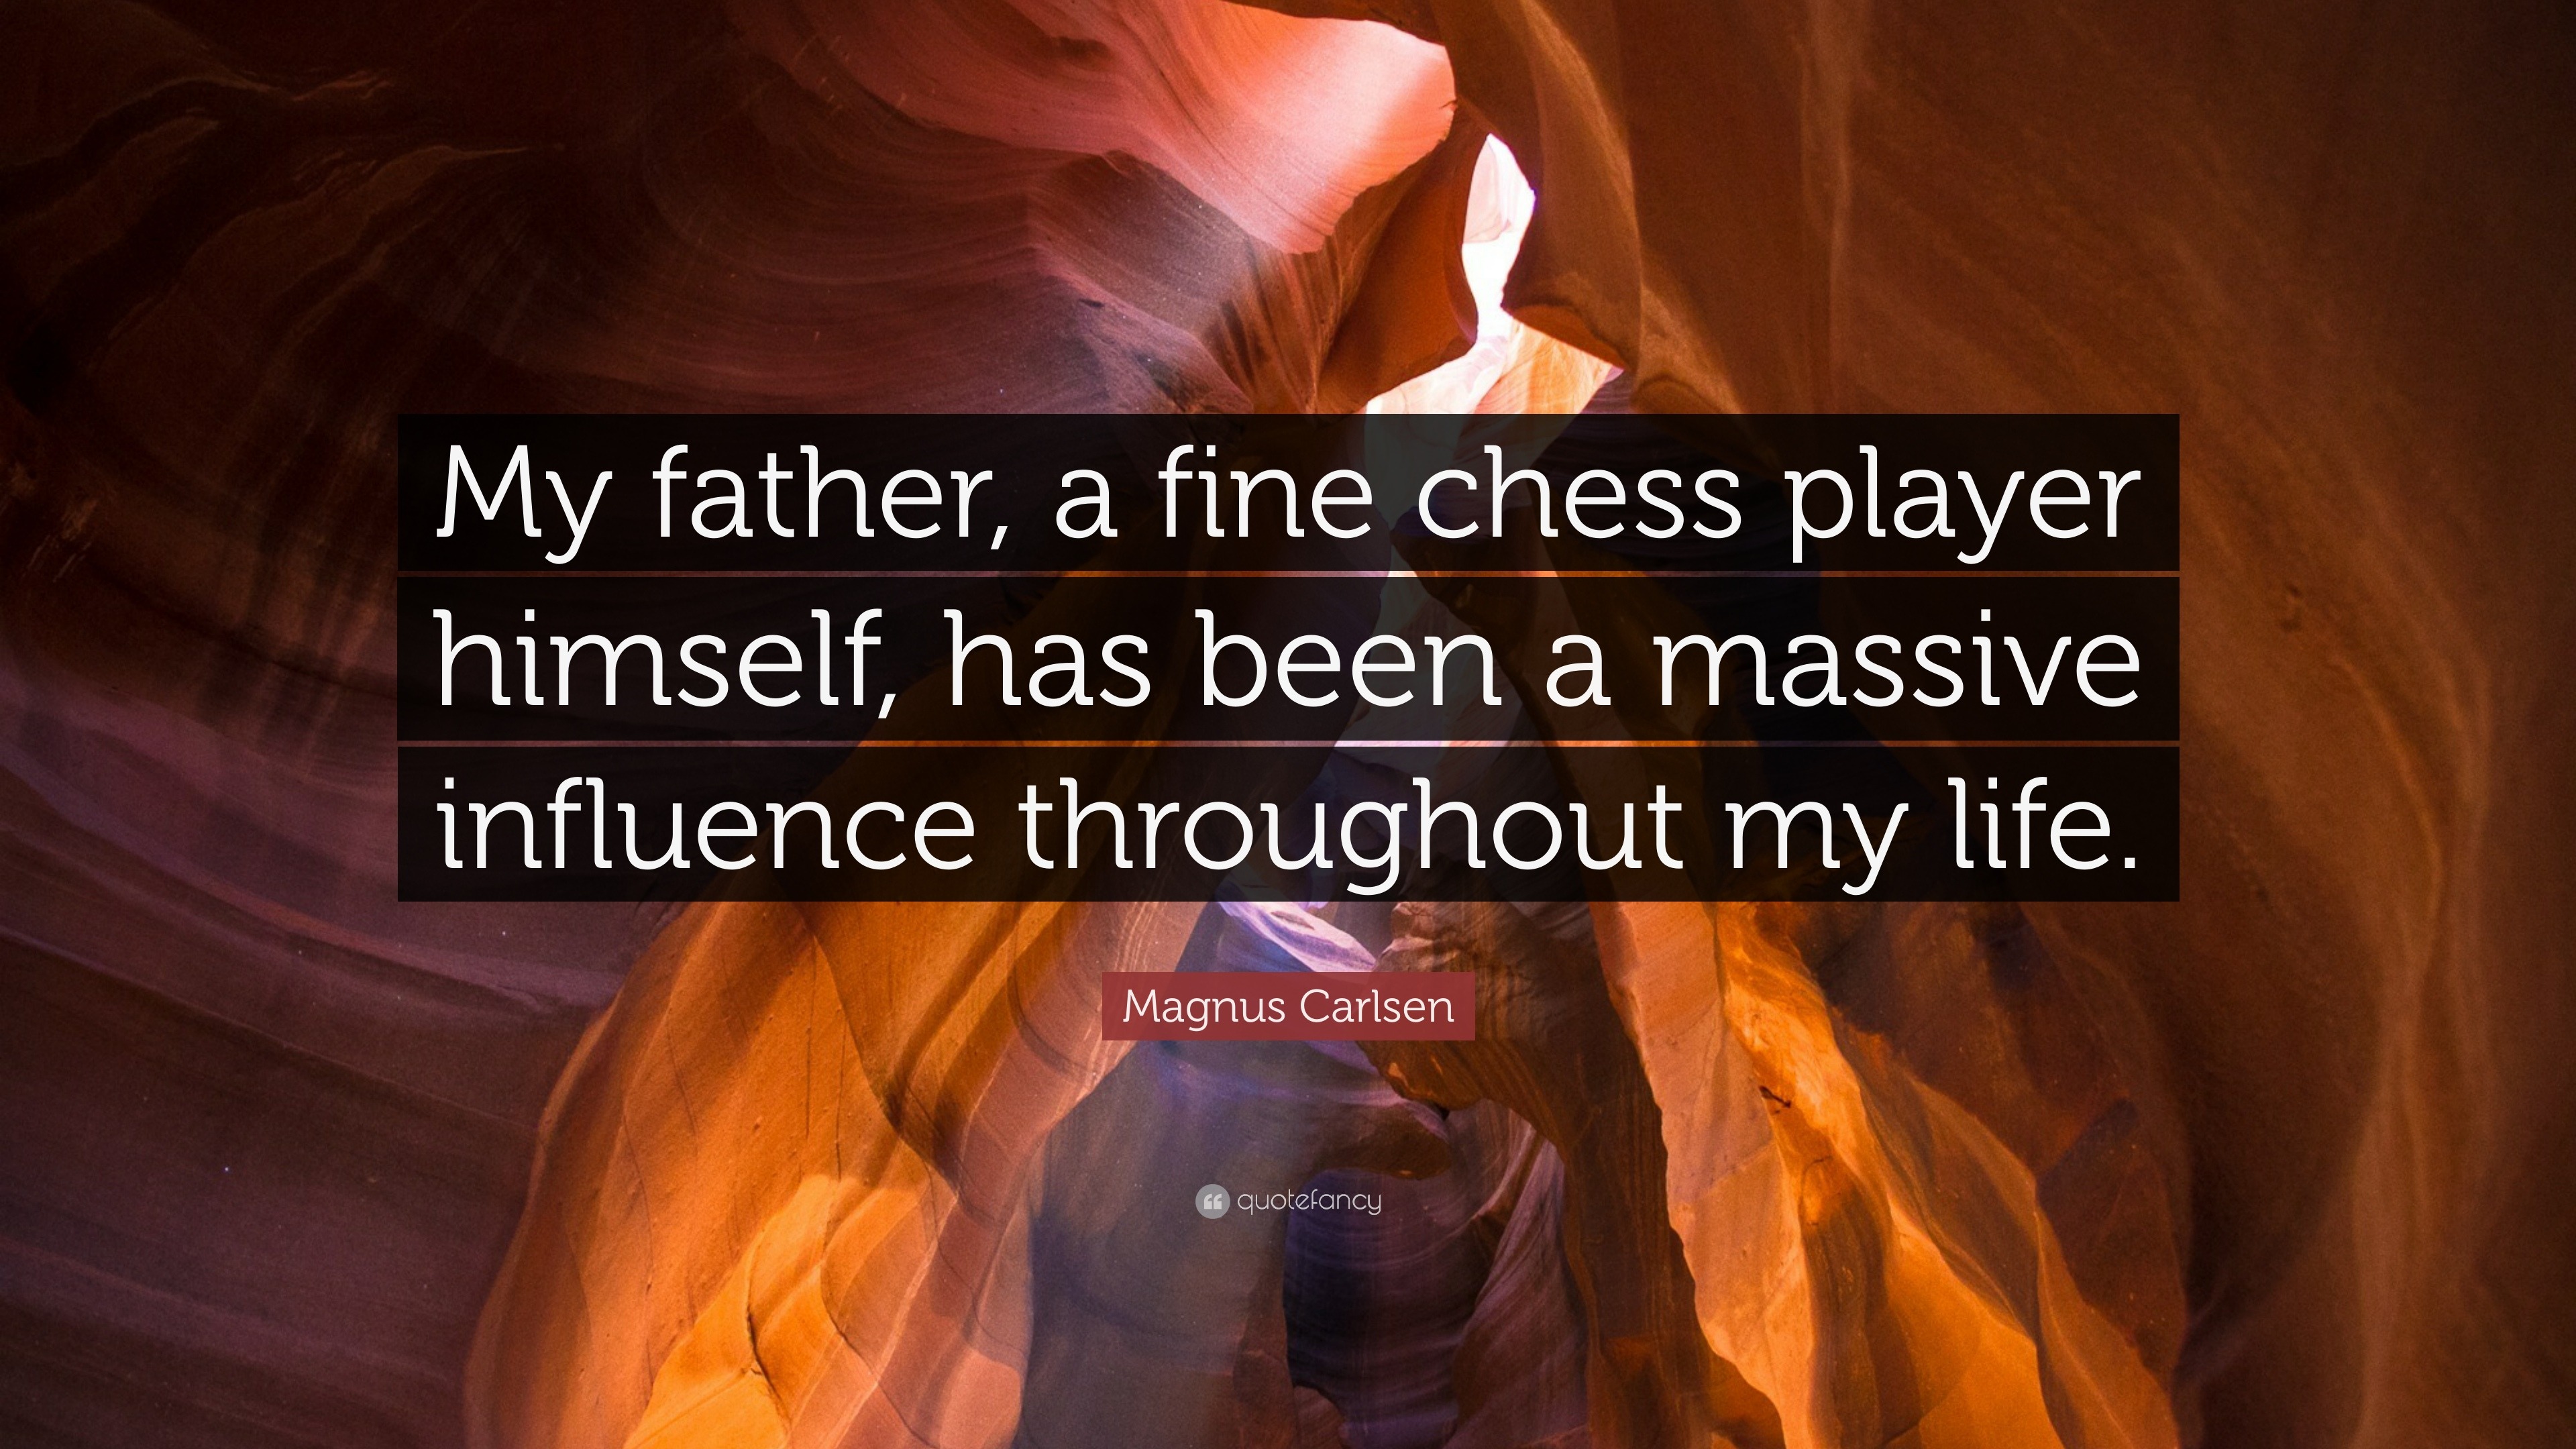 My father was not excited about me becoming a pro chess player